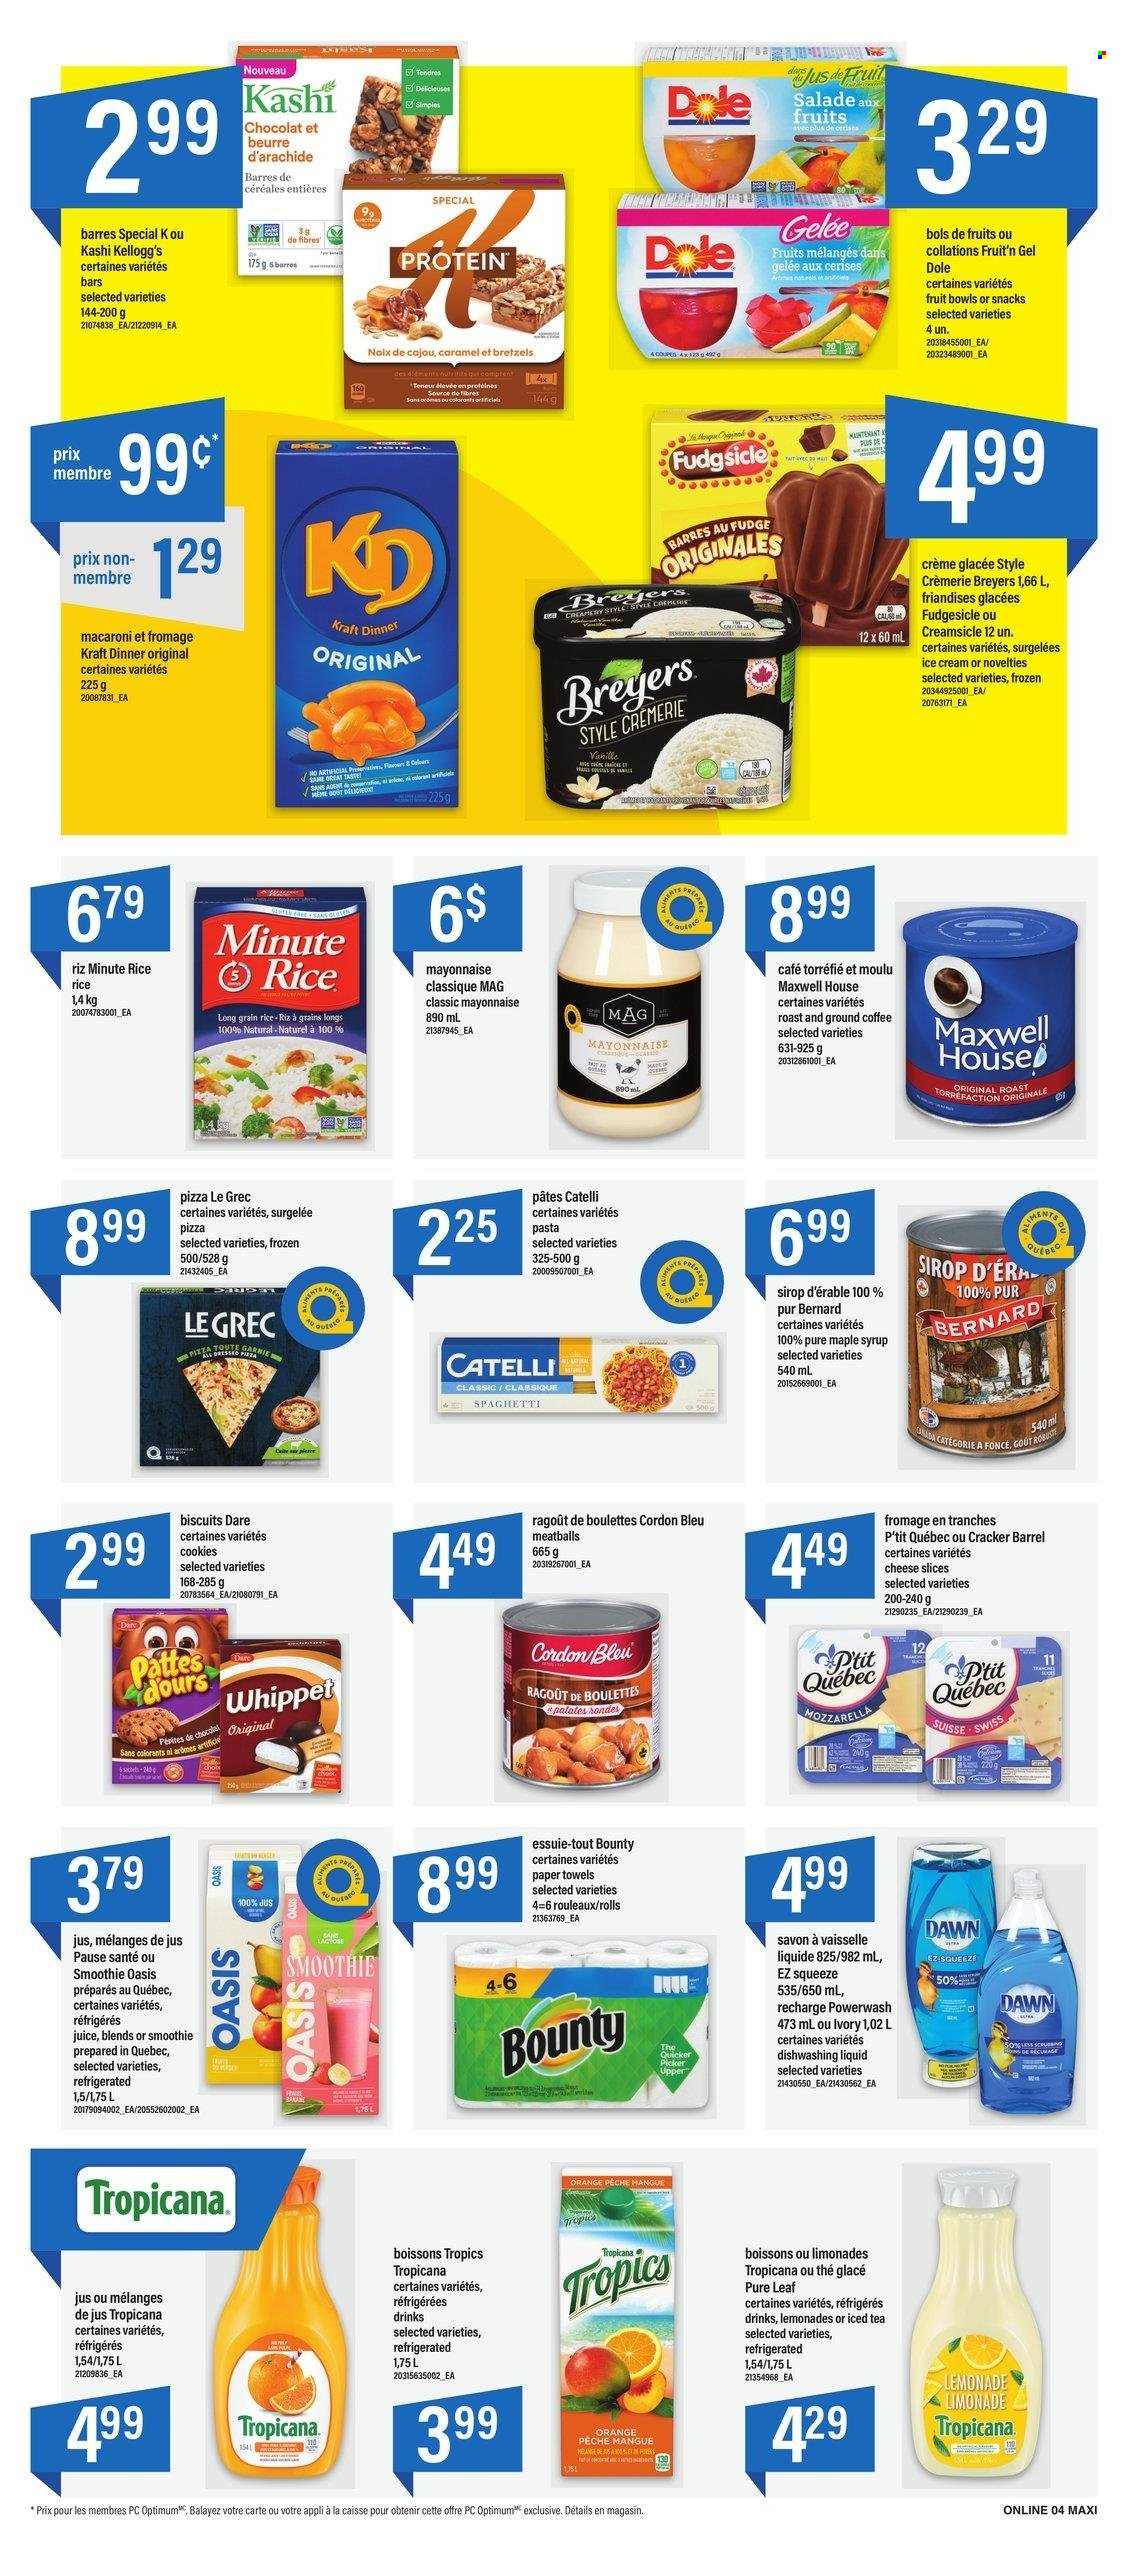 thumbnail - Maxi Flyer - March 23, 2023 - March 29, 2023 - Sales products - Dole, oranges, spaghetti, pizza, meatballs, macaroni, pasta, Kraft®, roast, sliced cheese, mayonnaise, ice cream, cookies, fudge, Bounty, crackers, Kellogg's, biscuit, rice, long grain rice, caramel, maple syrup, syrup, lemonade, juice, ice tea, smoothie, Maxwell House, Pure Leaf, coffee, ground coffee, kitchen towels, paper towels, dishwashing liquid, cordon bleu. Page 9.